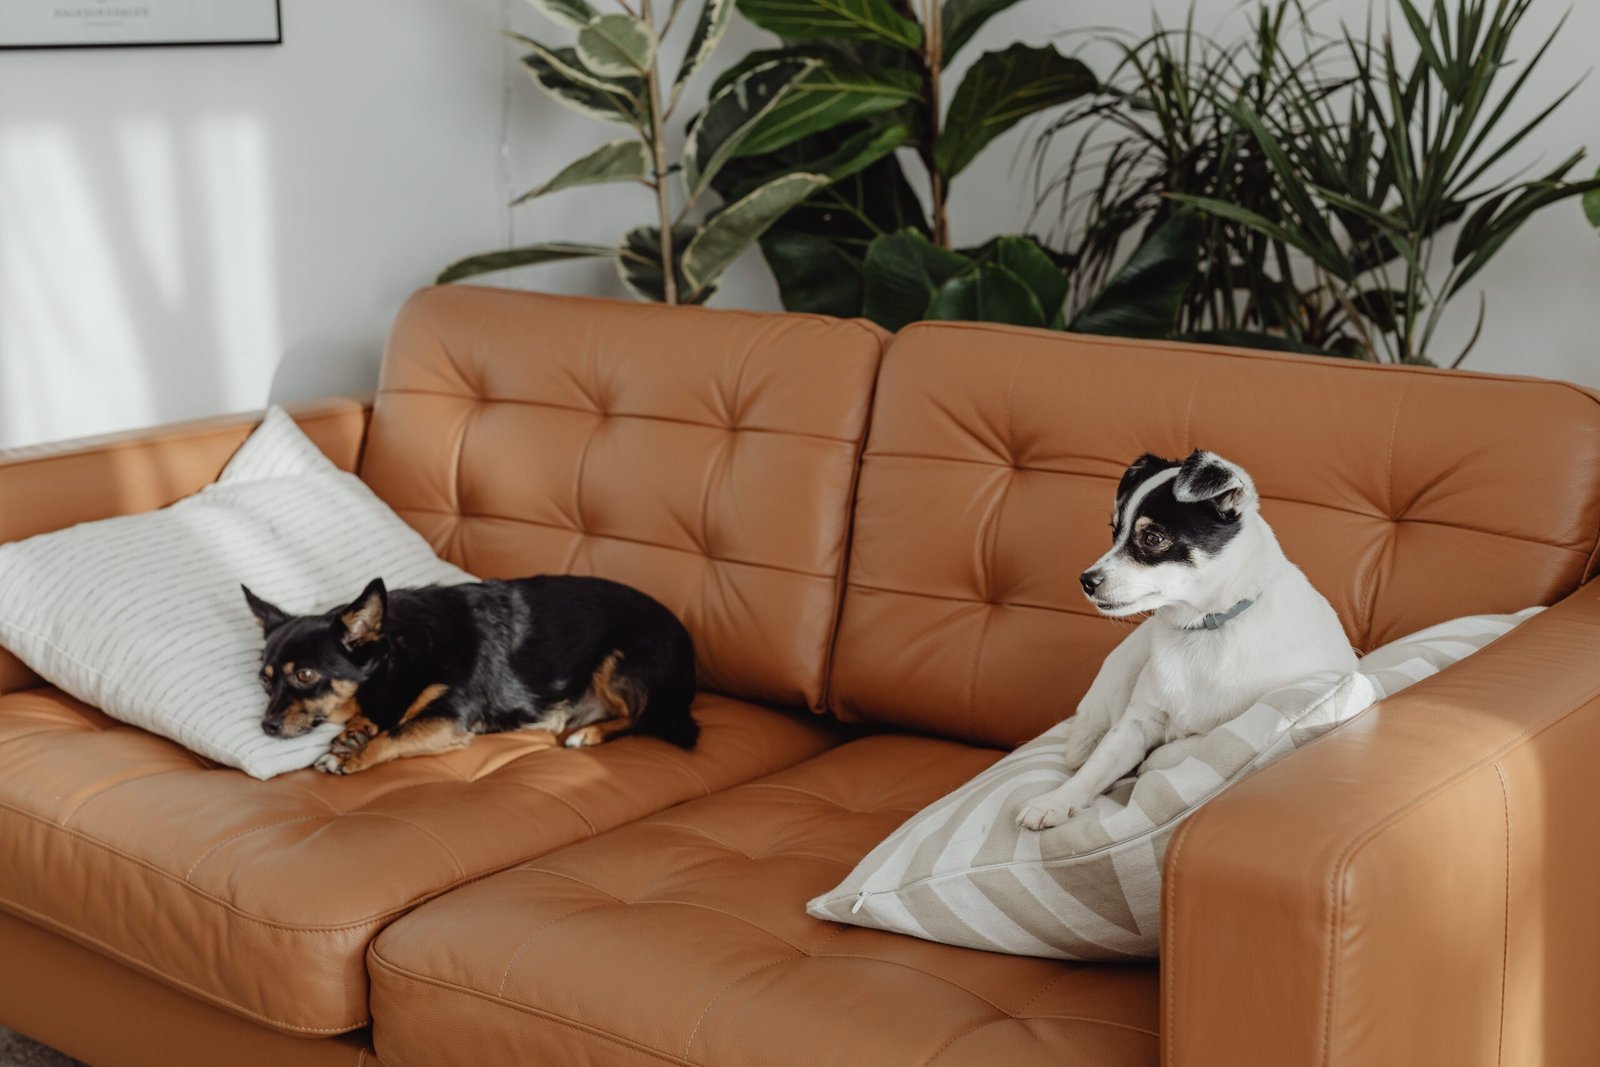 Two dogs, one black and tan and the other white with black patches, resting separately on a caramel-colored leather couch with a striped pillow, in a room with a large potted plant.